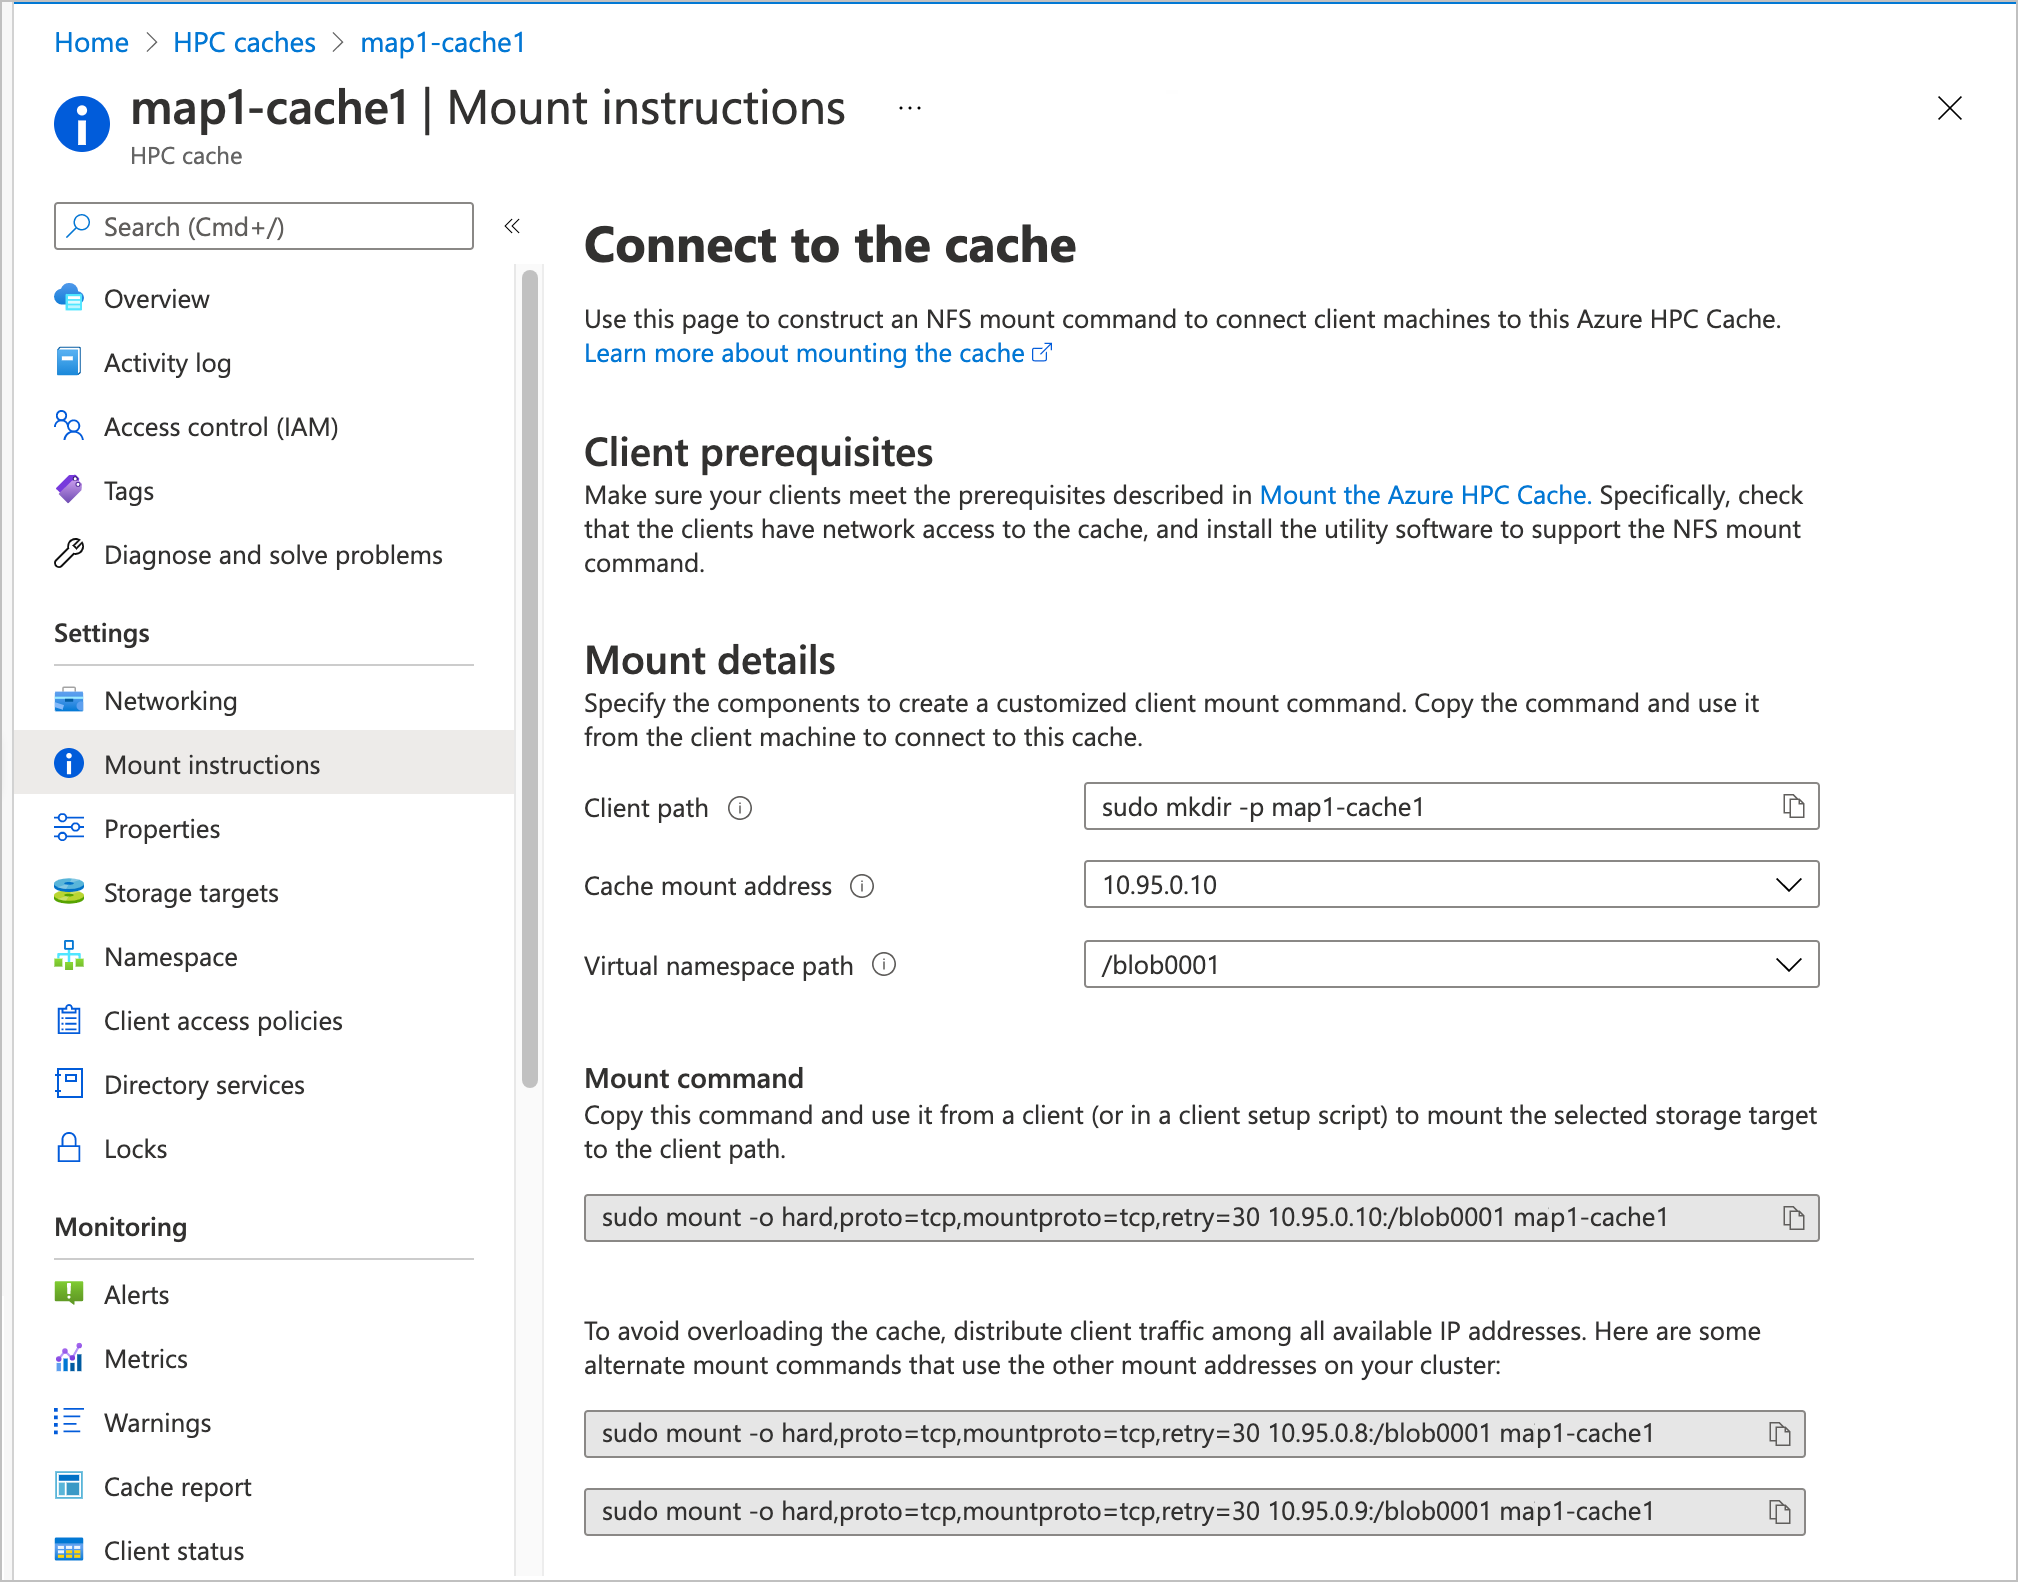 screenshot of an Azure HPC Cache instance in the portal, with the Configure > Mount instructions page loaded